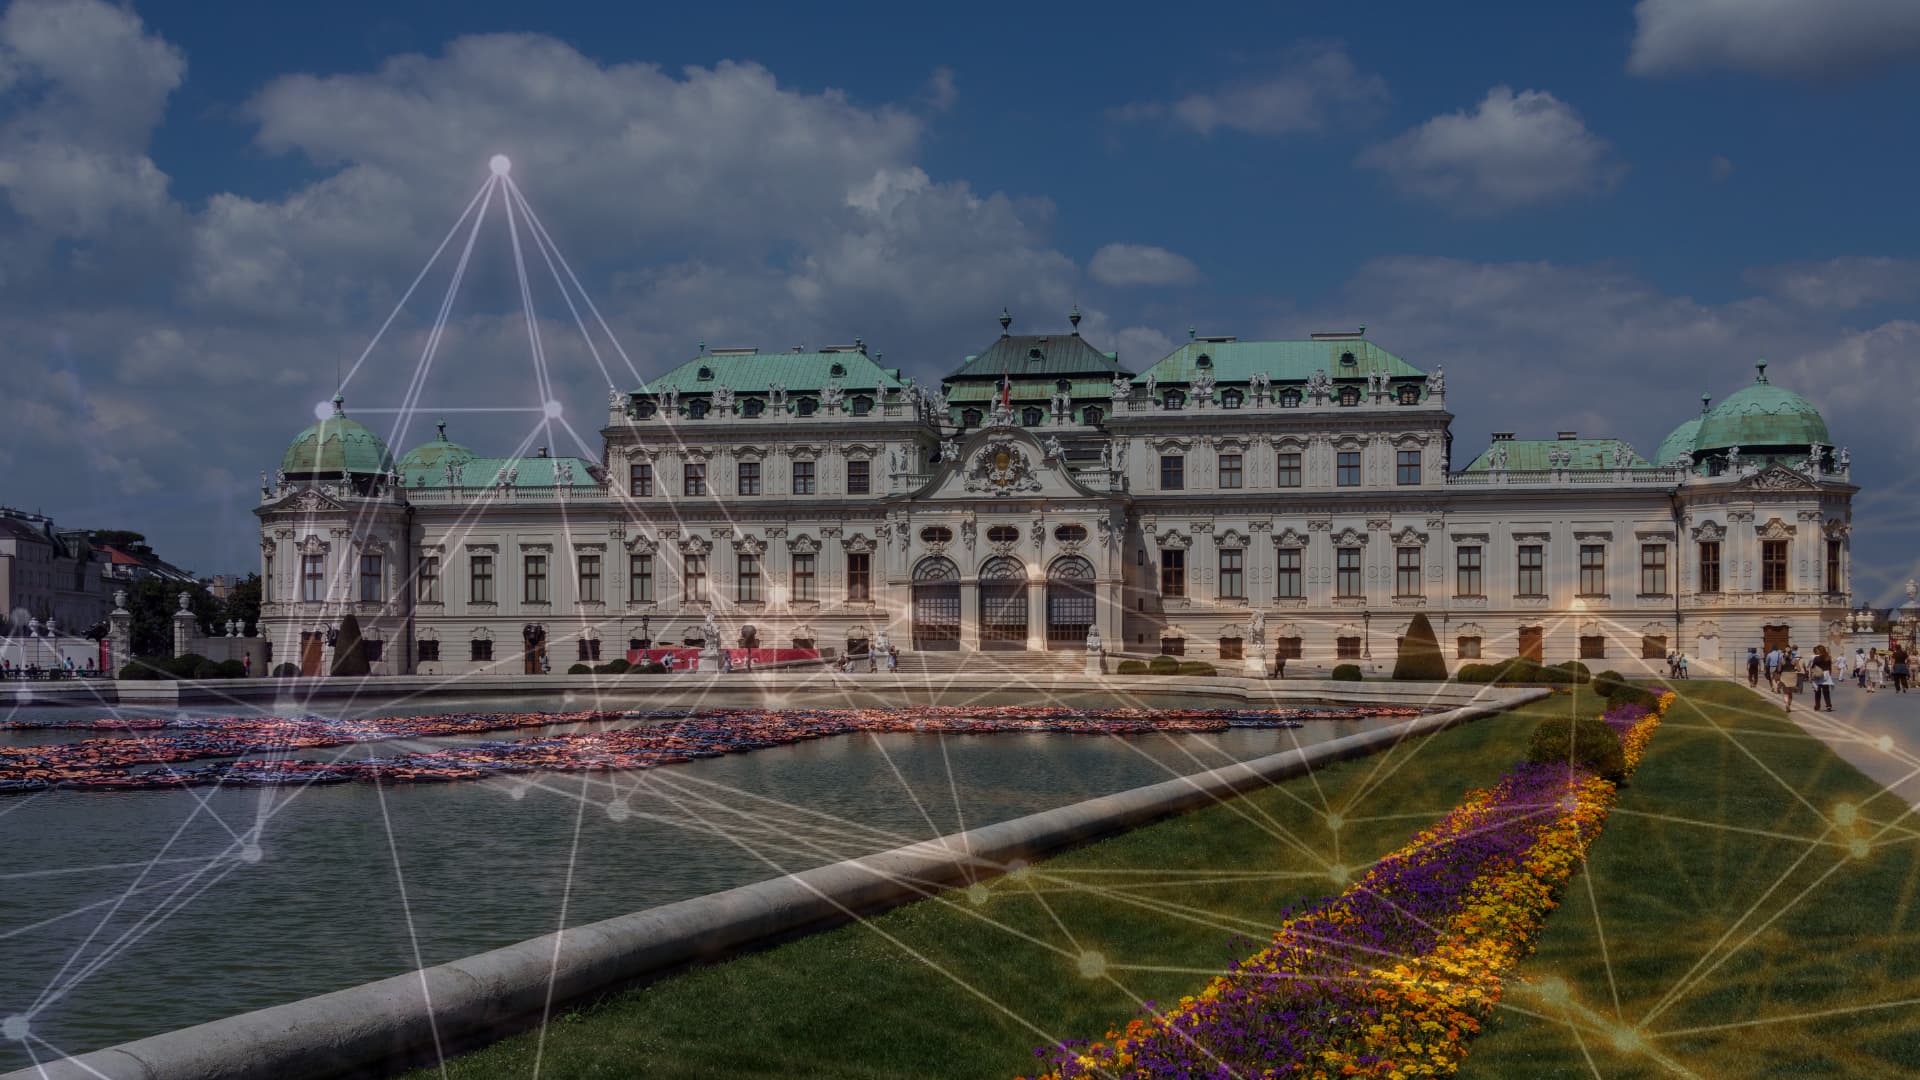 Upper Belverdere Palace in Vienna, Austria with the concept of blockchain technology